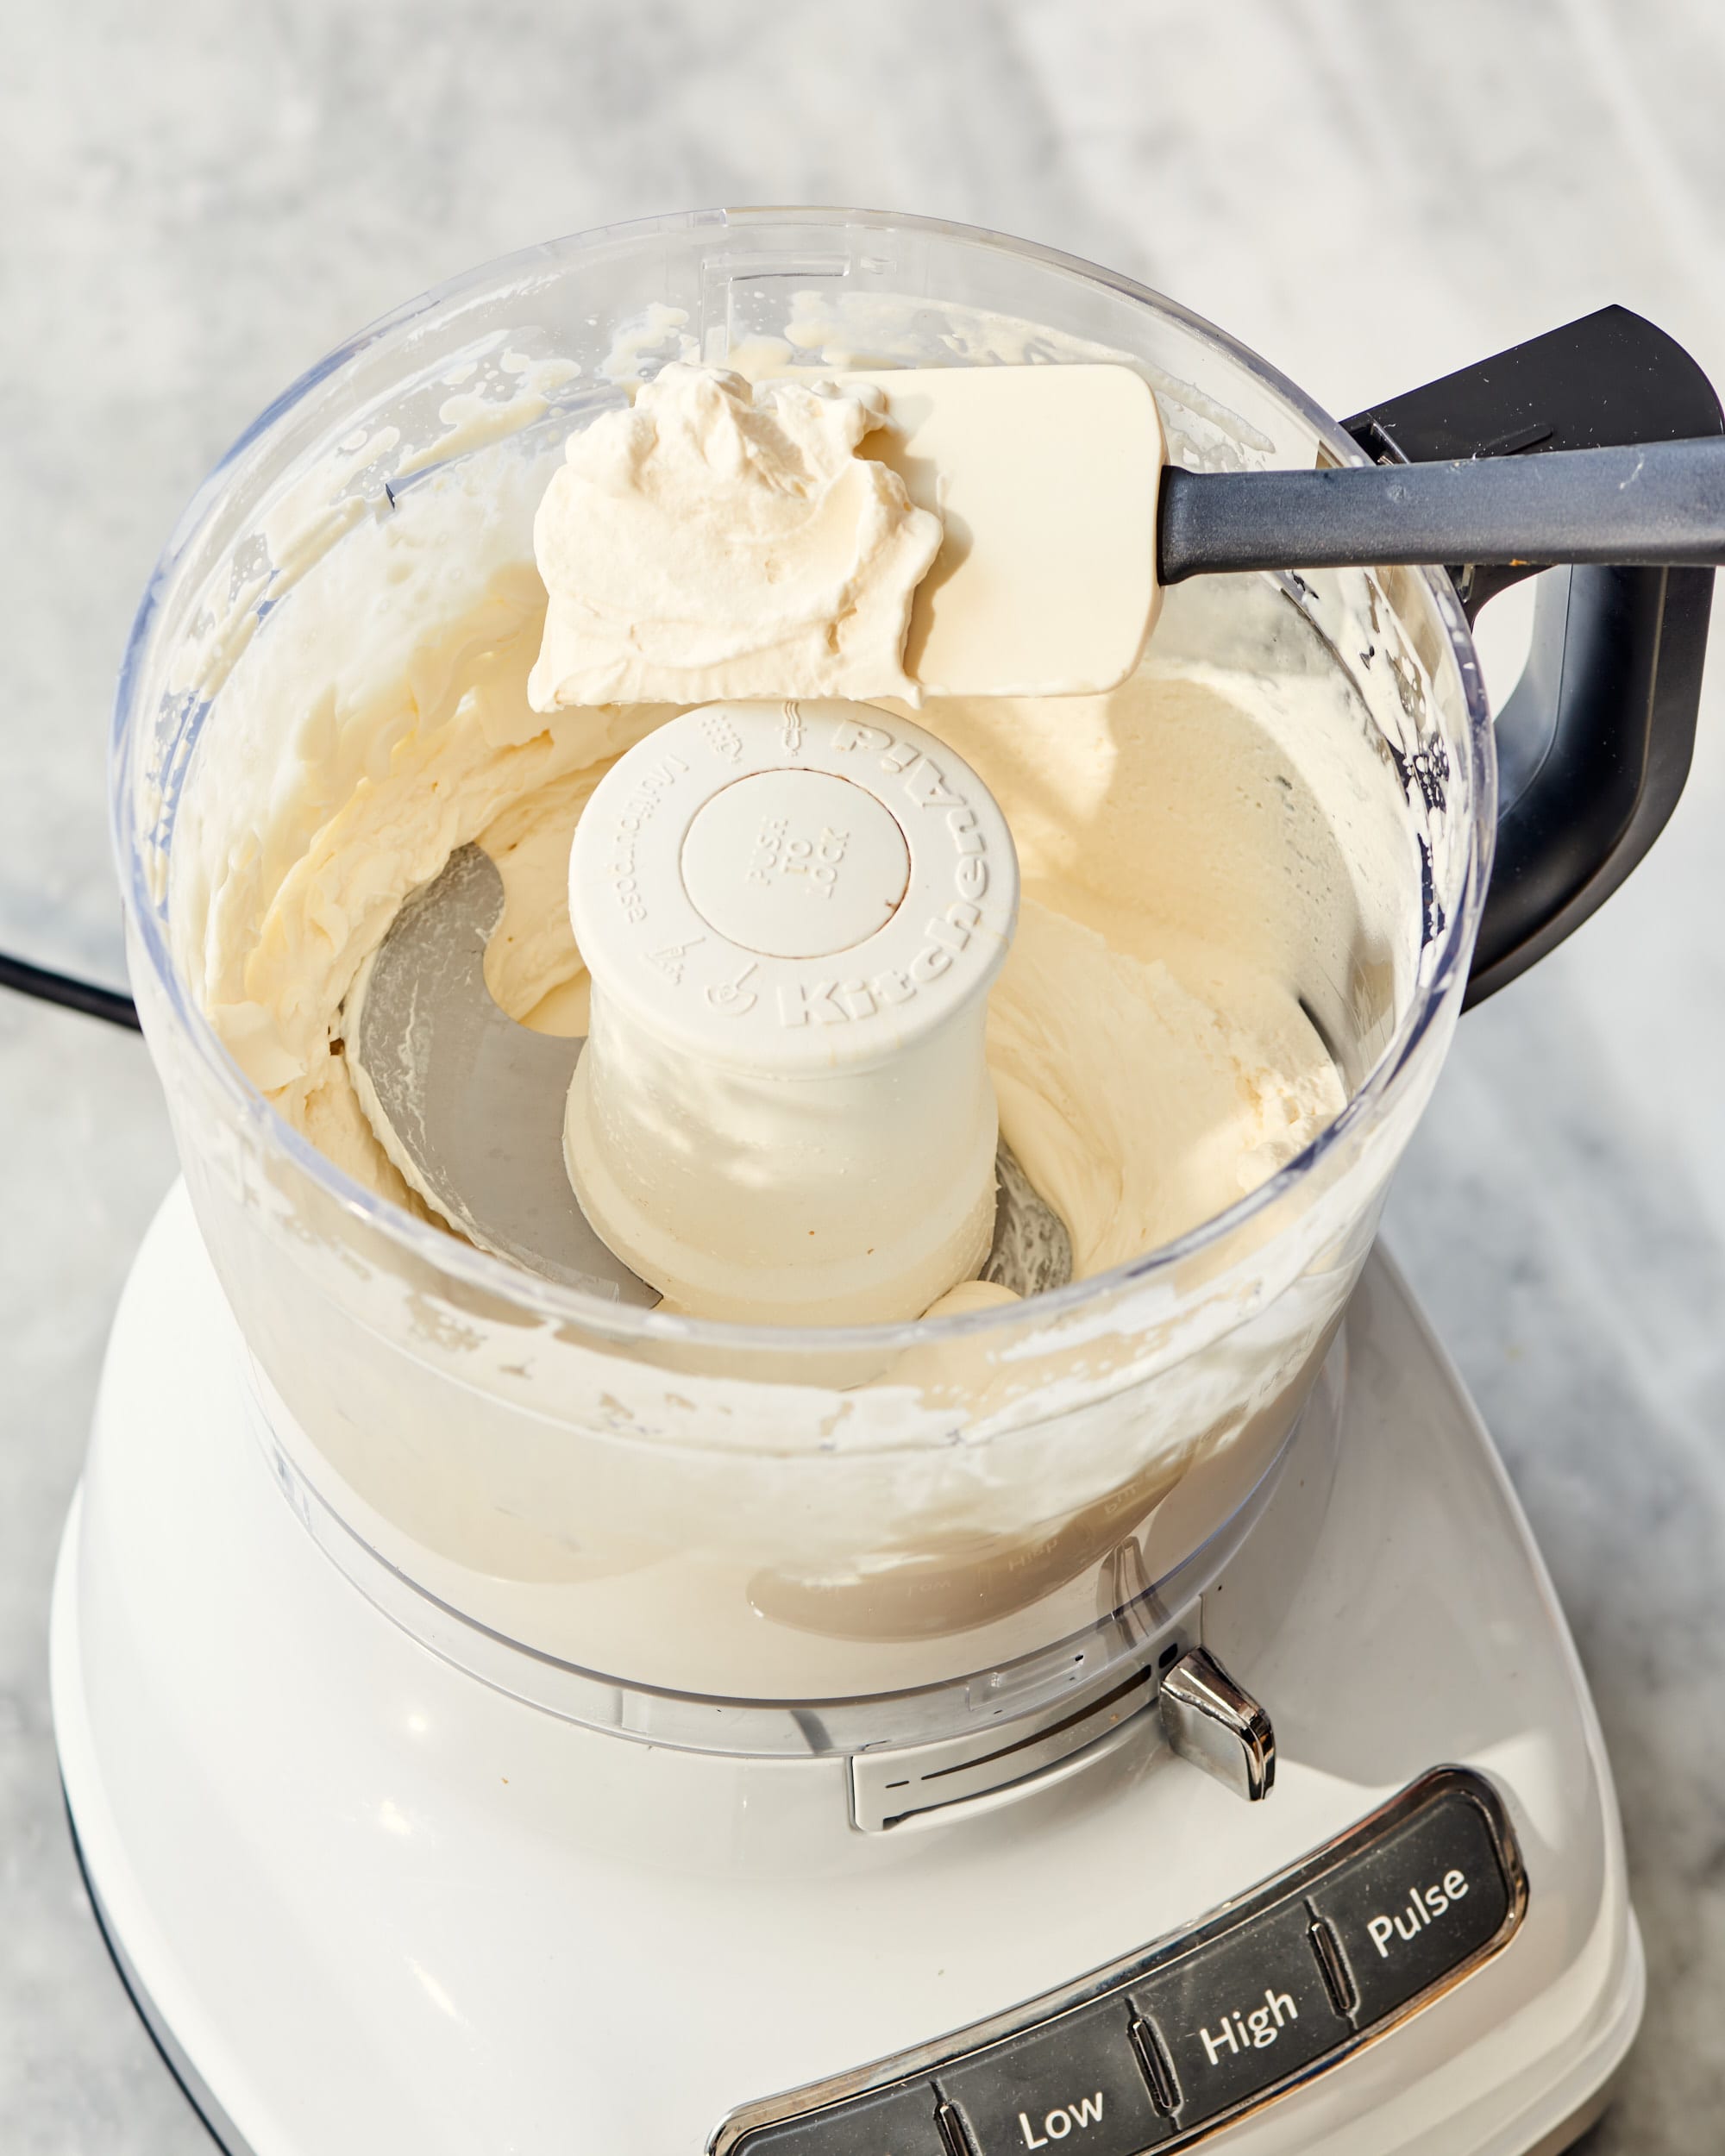 How to Make Whipped Cream with an Immersion Blender 